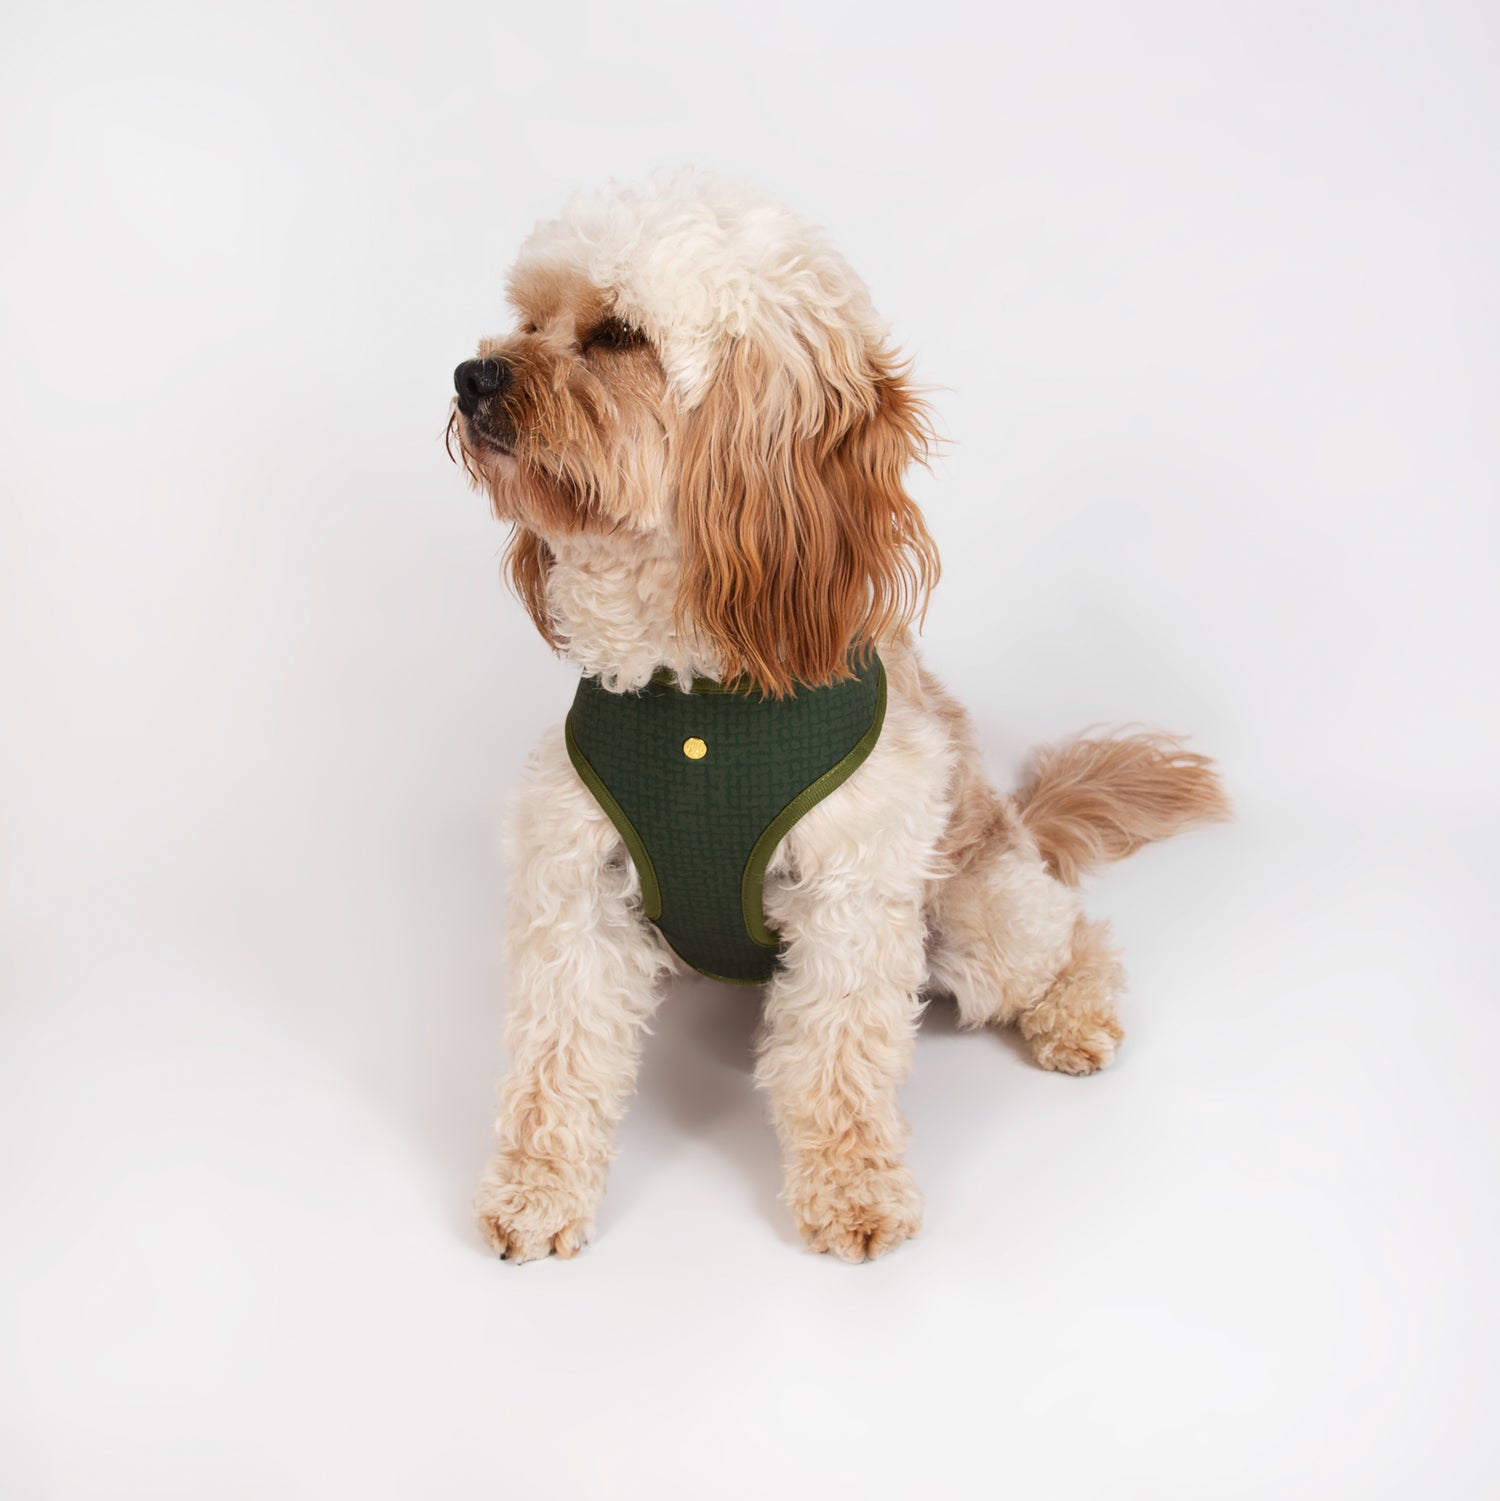 Pata Paw alpine wildflowers reversible harness as seen in a medium dog. Reverse design showing a timeless and chic texture pattern in olive green.